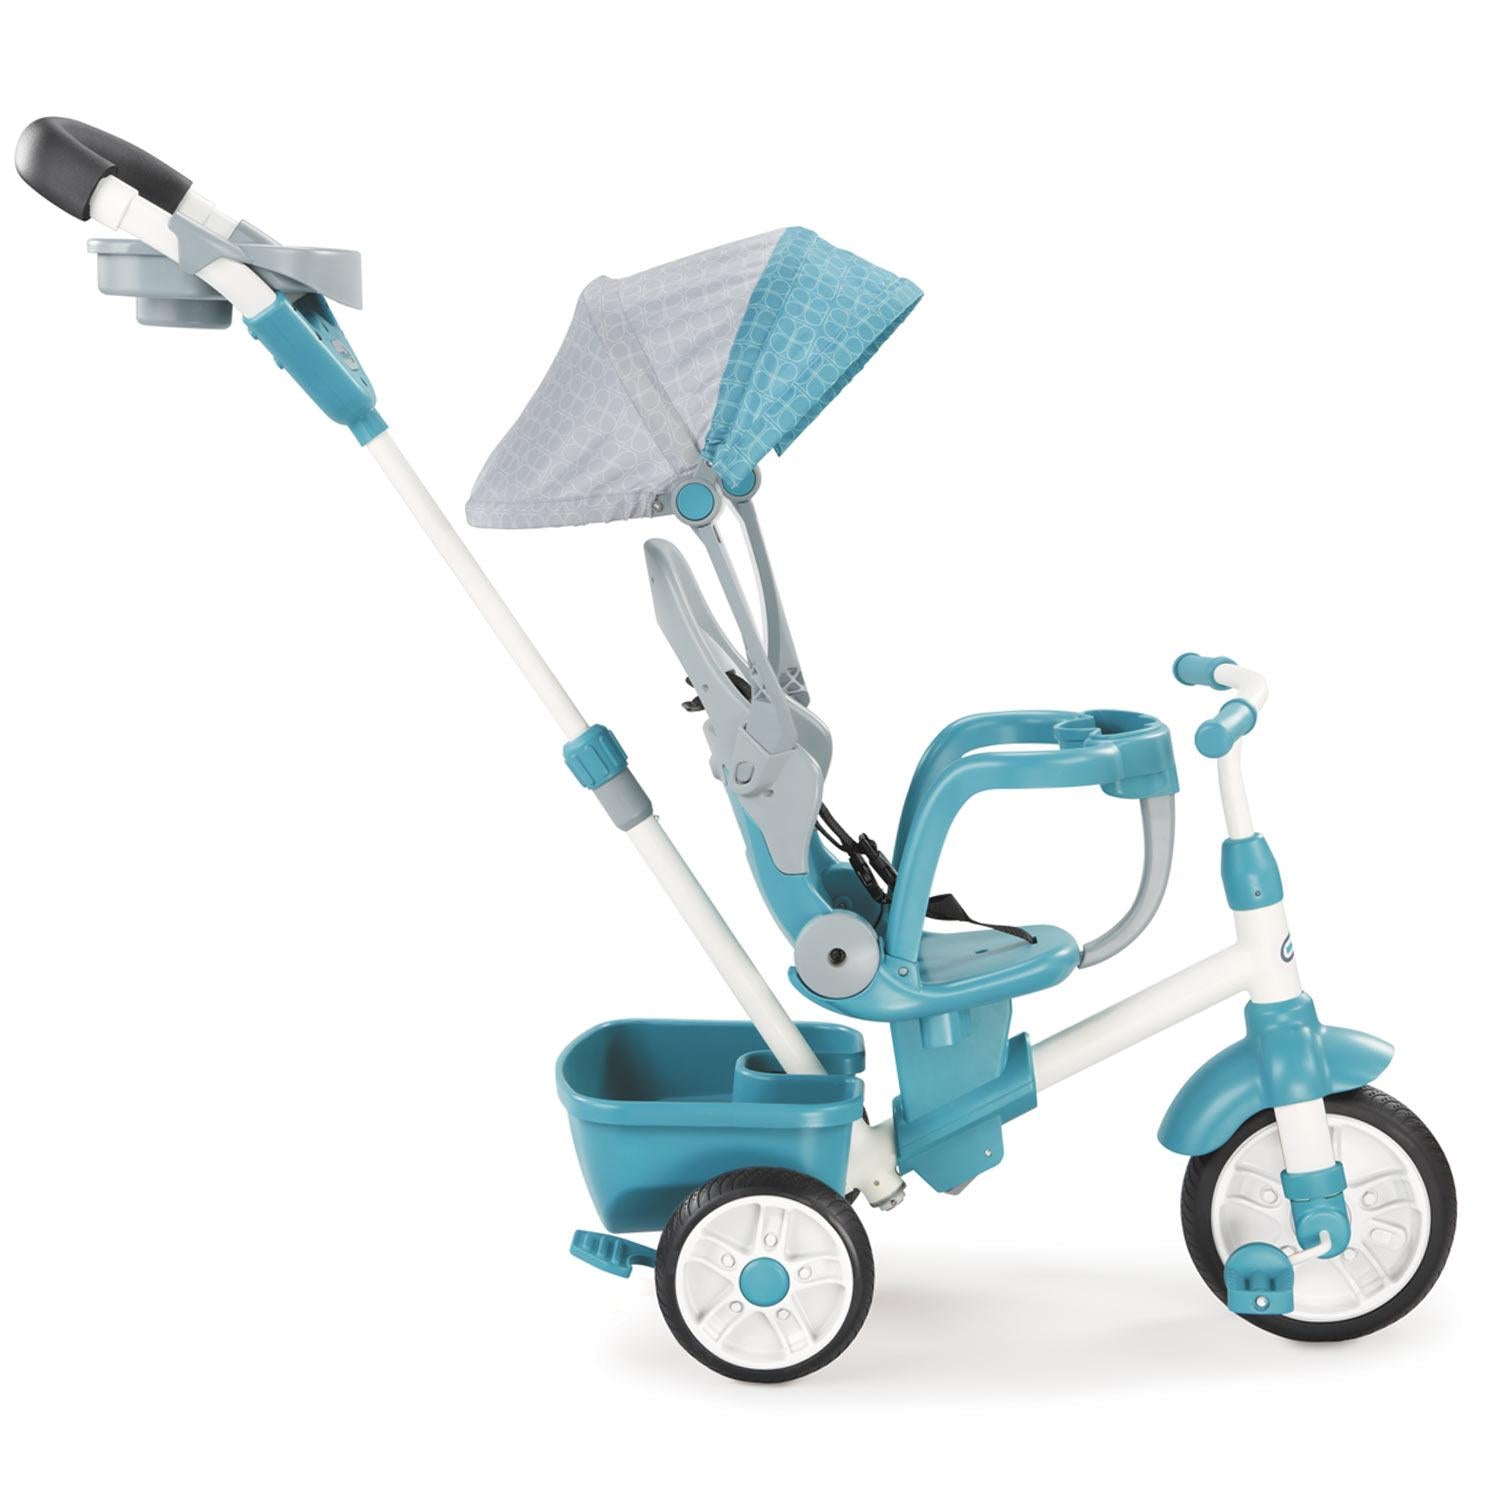  Perfect Fit™ 4-in-1 Trike Childs Toy - Teal 